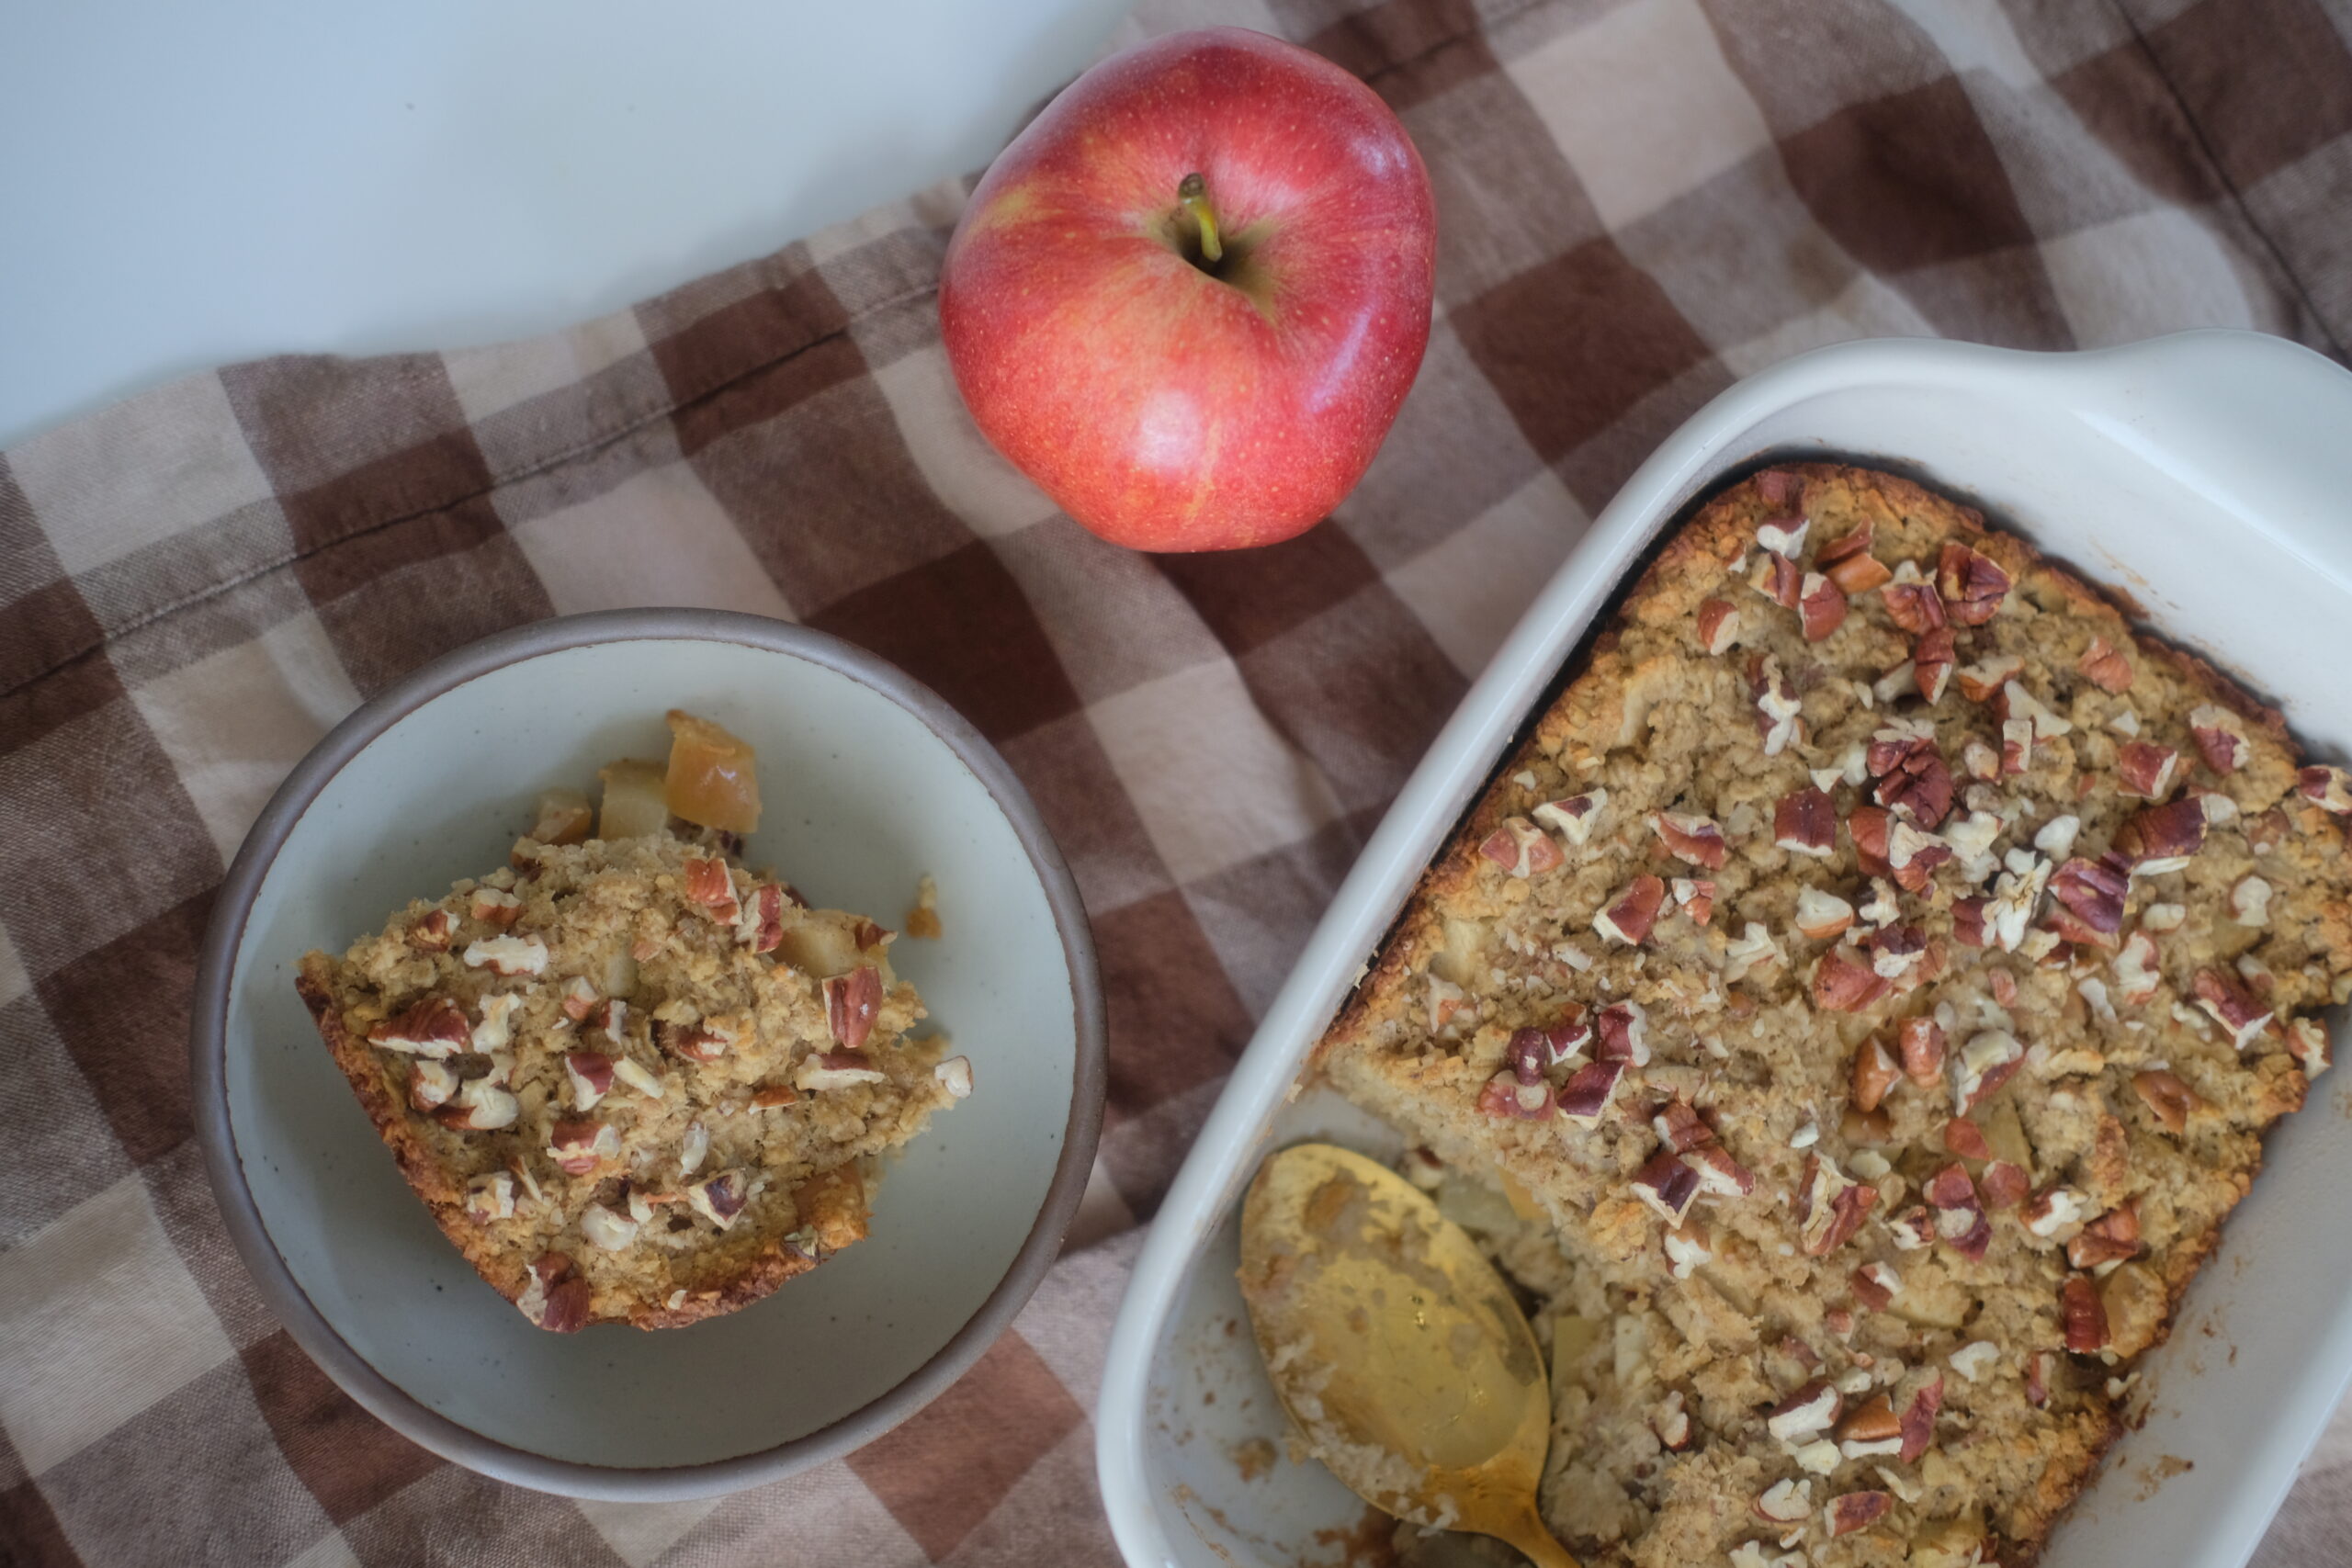 If you the idea of having oatmeal in the morning, but you're not too keen on its porridge-like texture or the constant stirring on the stove, switch things up and try baked oatmeal instead.